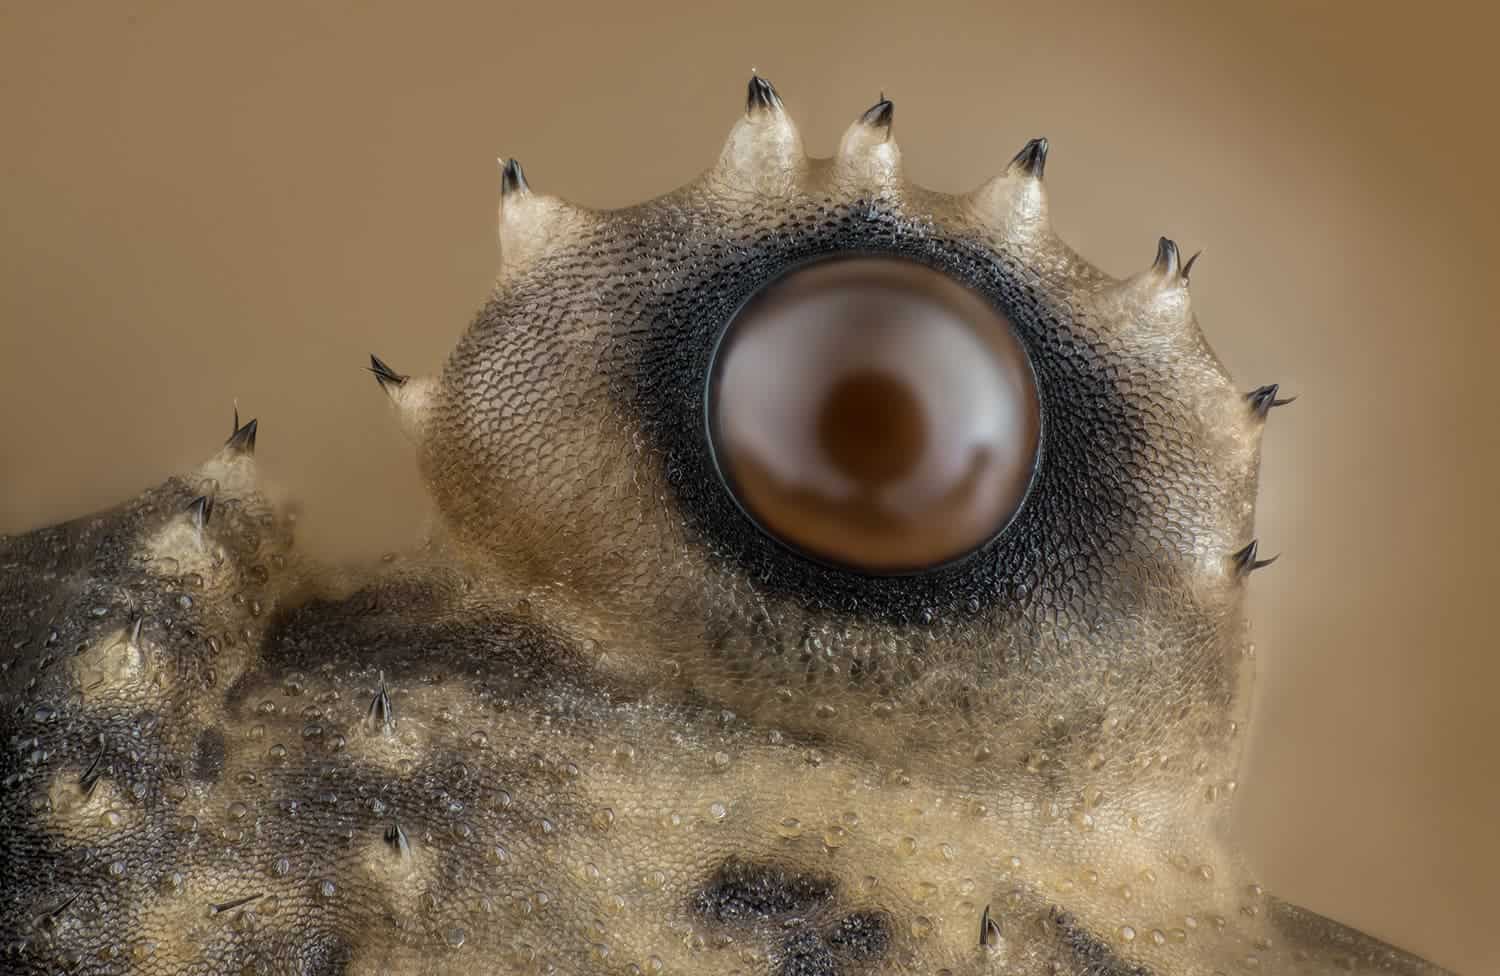 The 12th place winner shows a closeup of the eye of an Opiliones (daddy longlegs) magnified 20x.